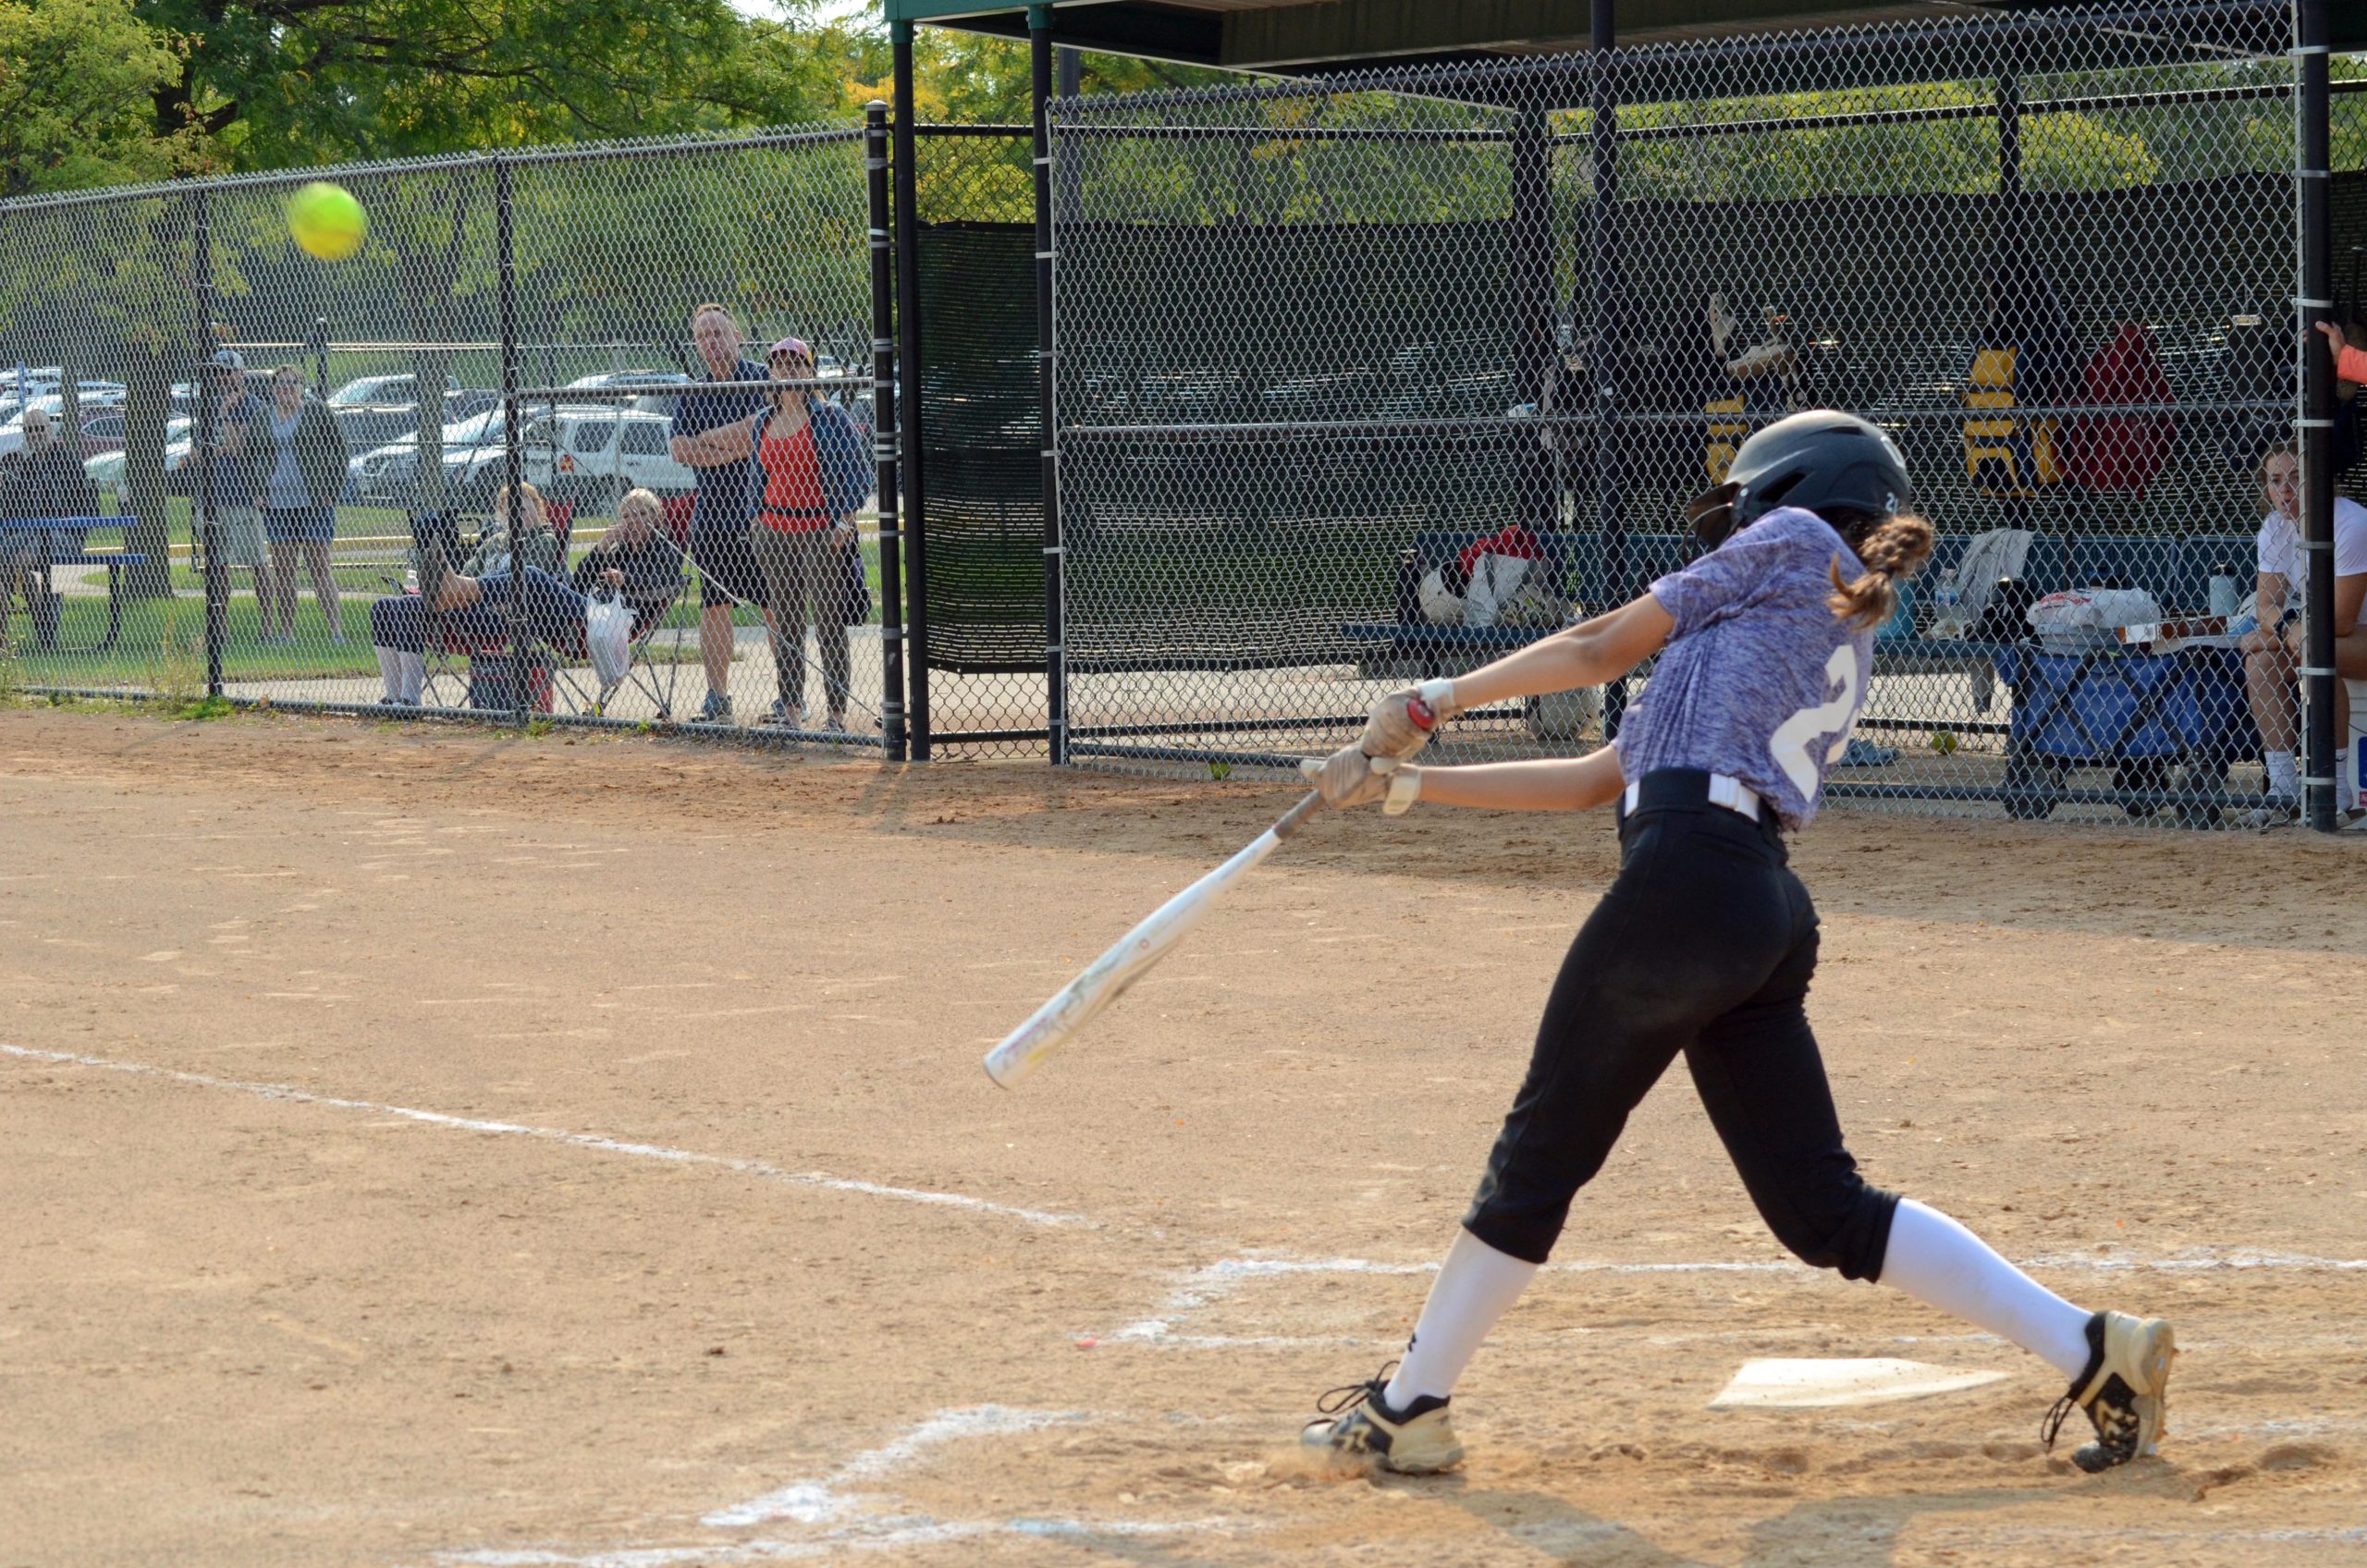 Lily Liu launched a fly ball Sept. 11 against Plymouth Riptide